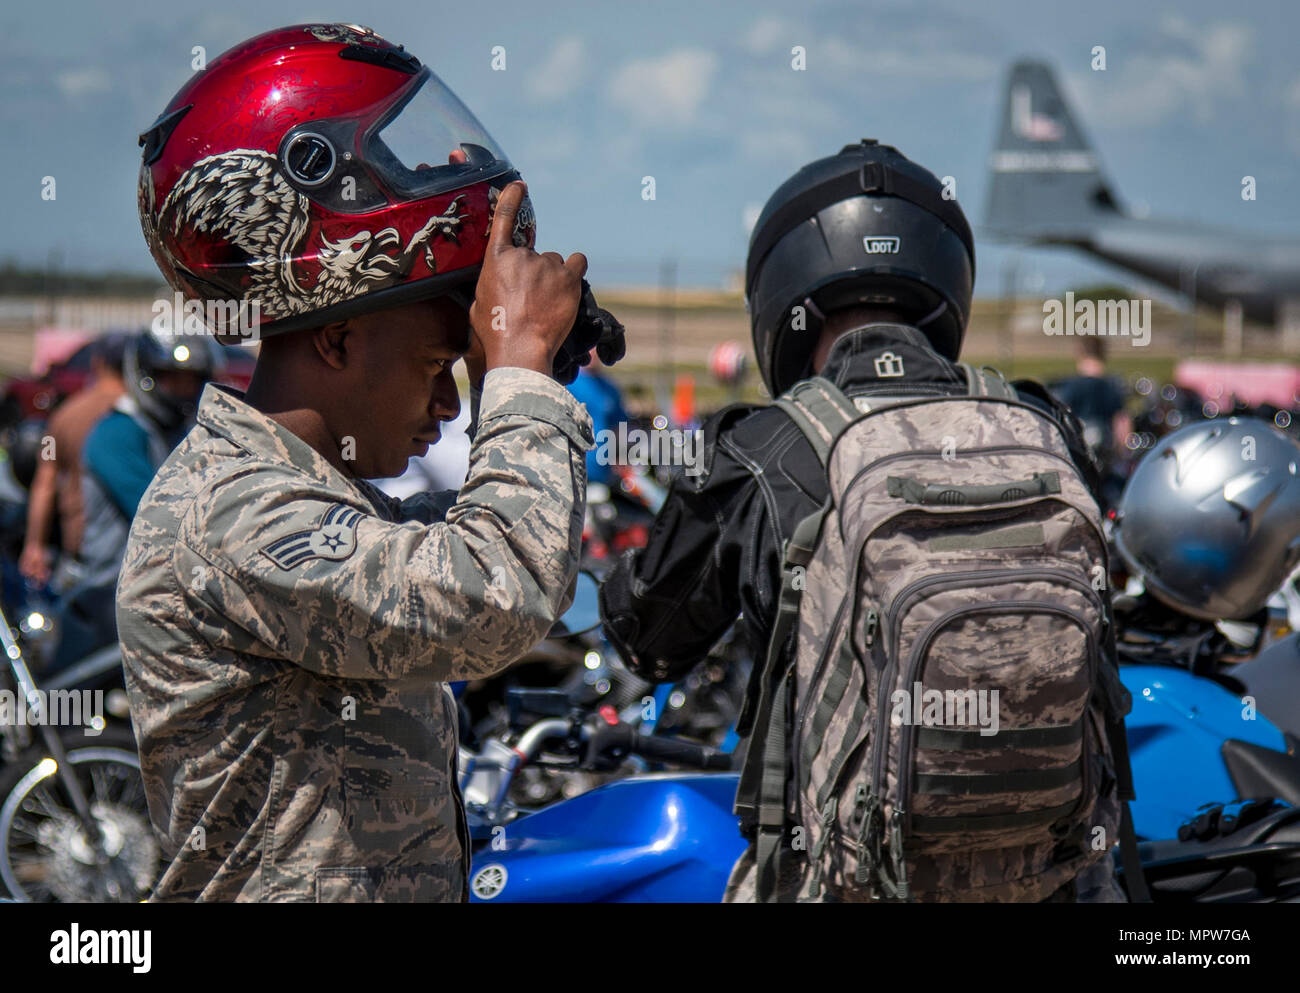 A senior airman puts on his helmet after the annual motorcycle safety rally at Eglin Air Force Base, Fla., April 14.  More than 500 motorcyclists came out for the event that meets the annual safety briefing requirement for base riders.  (U.S. Air Force photo/Samuel King Jr.) Stock Photo